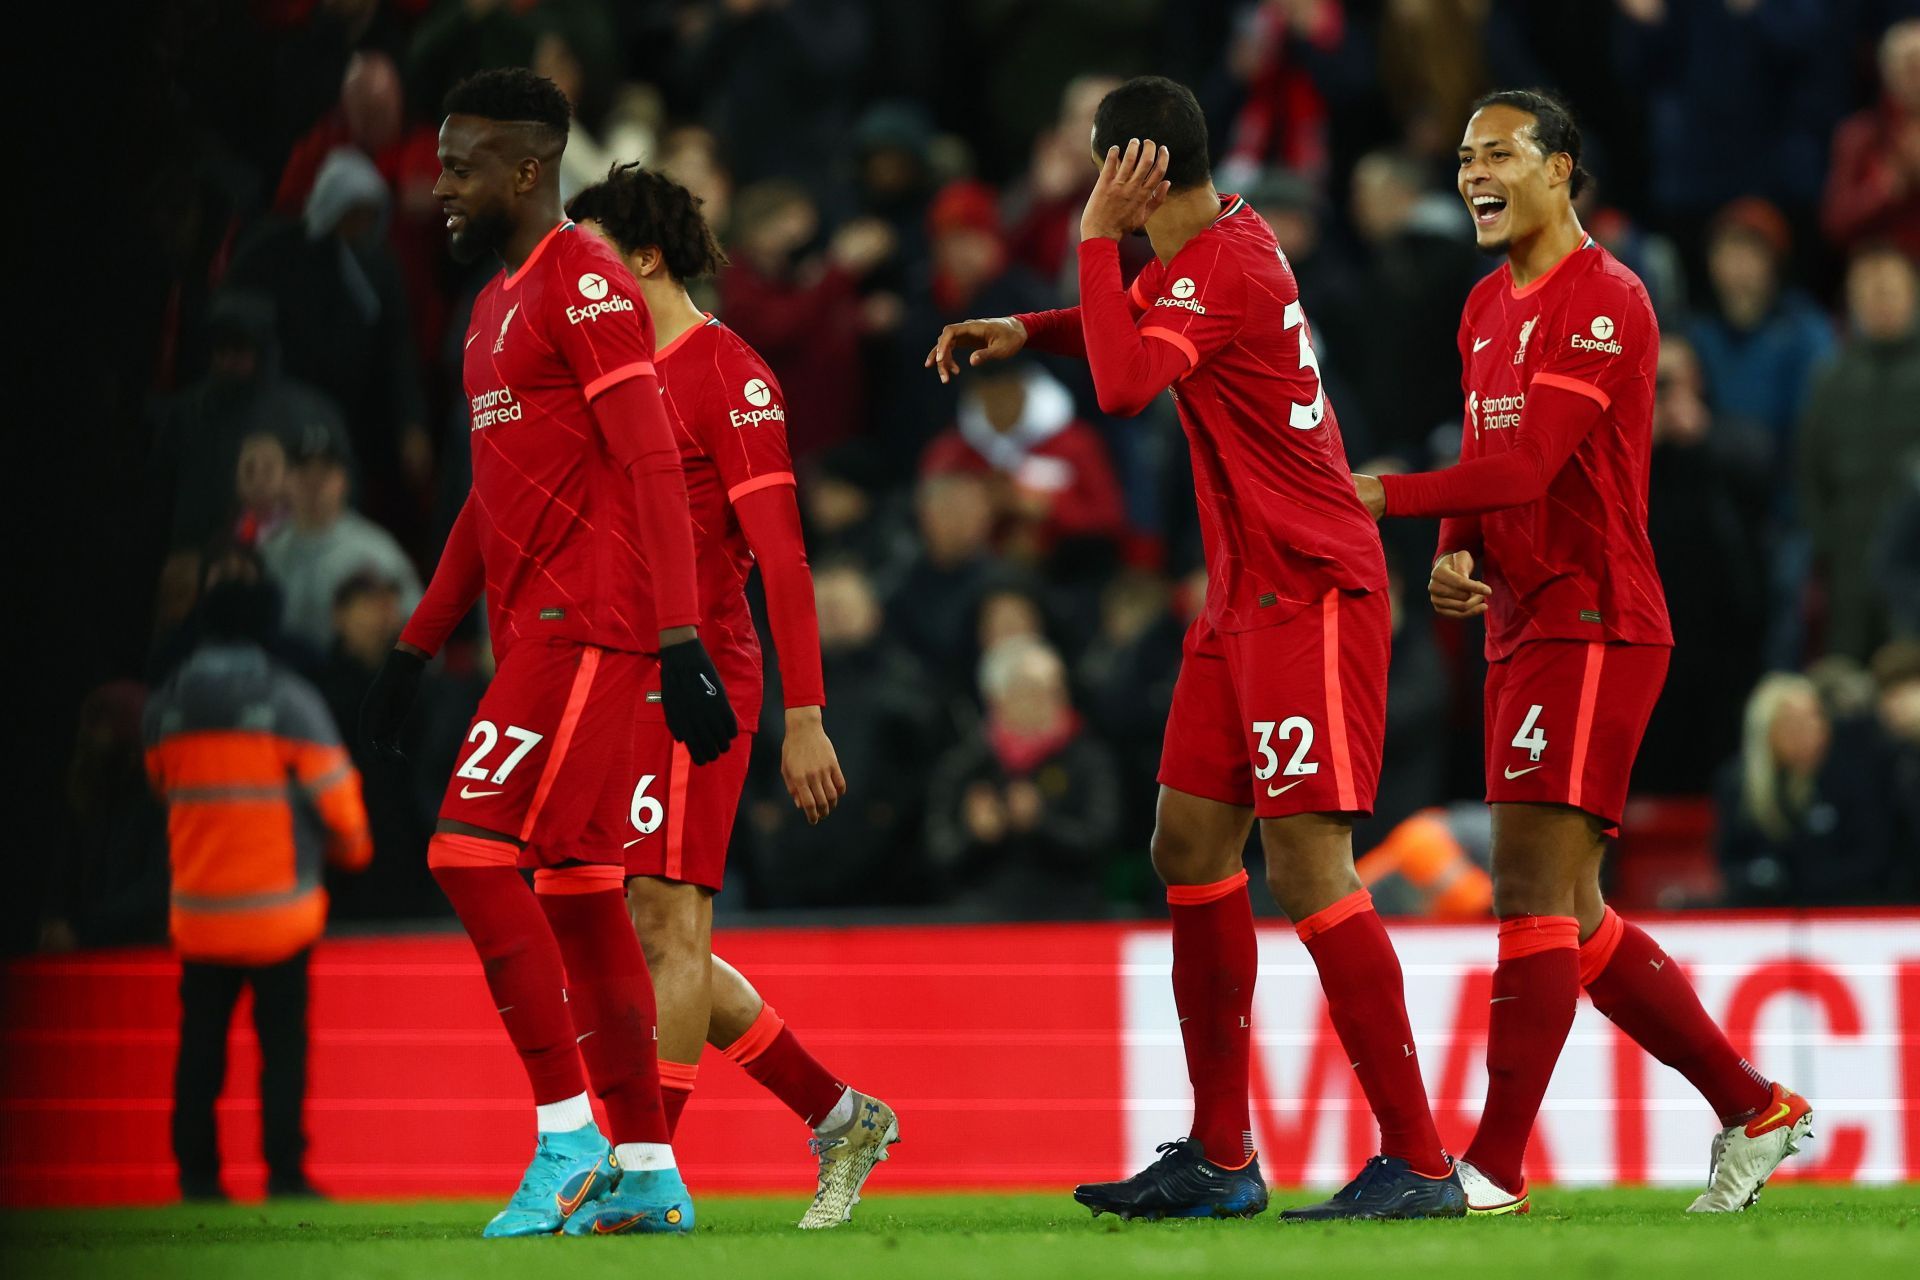 The Reds have won nine matches on the bounce